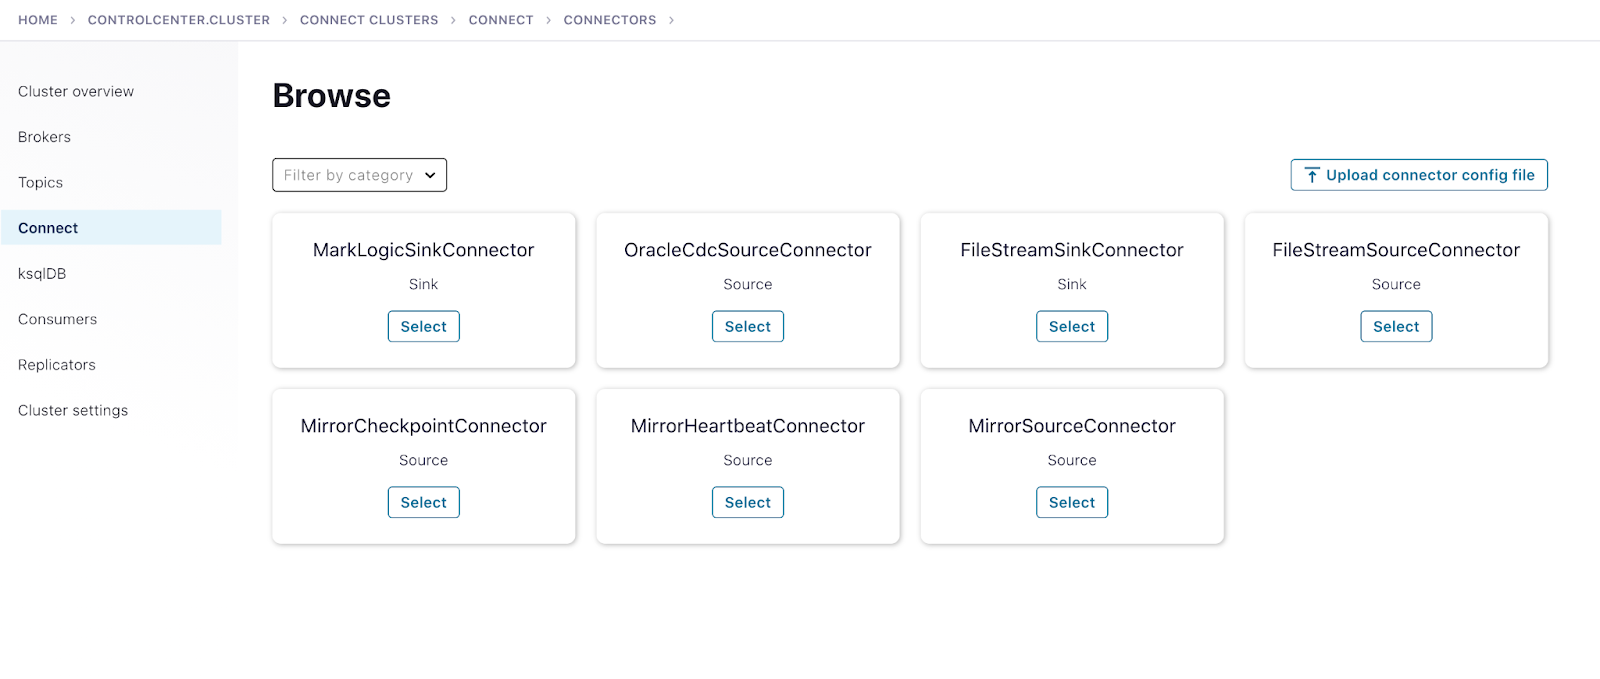 Control Center shows the deployed Oracle CDC and MarkLogic connectors